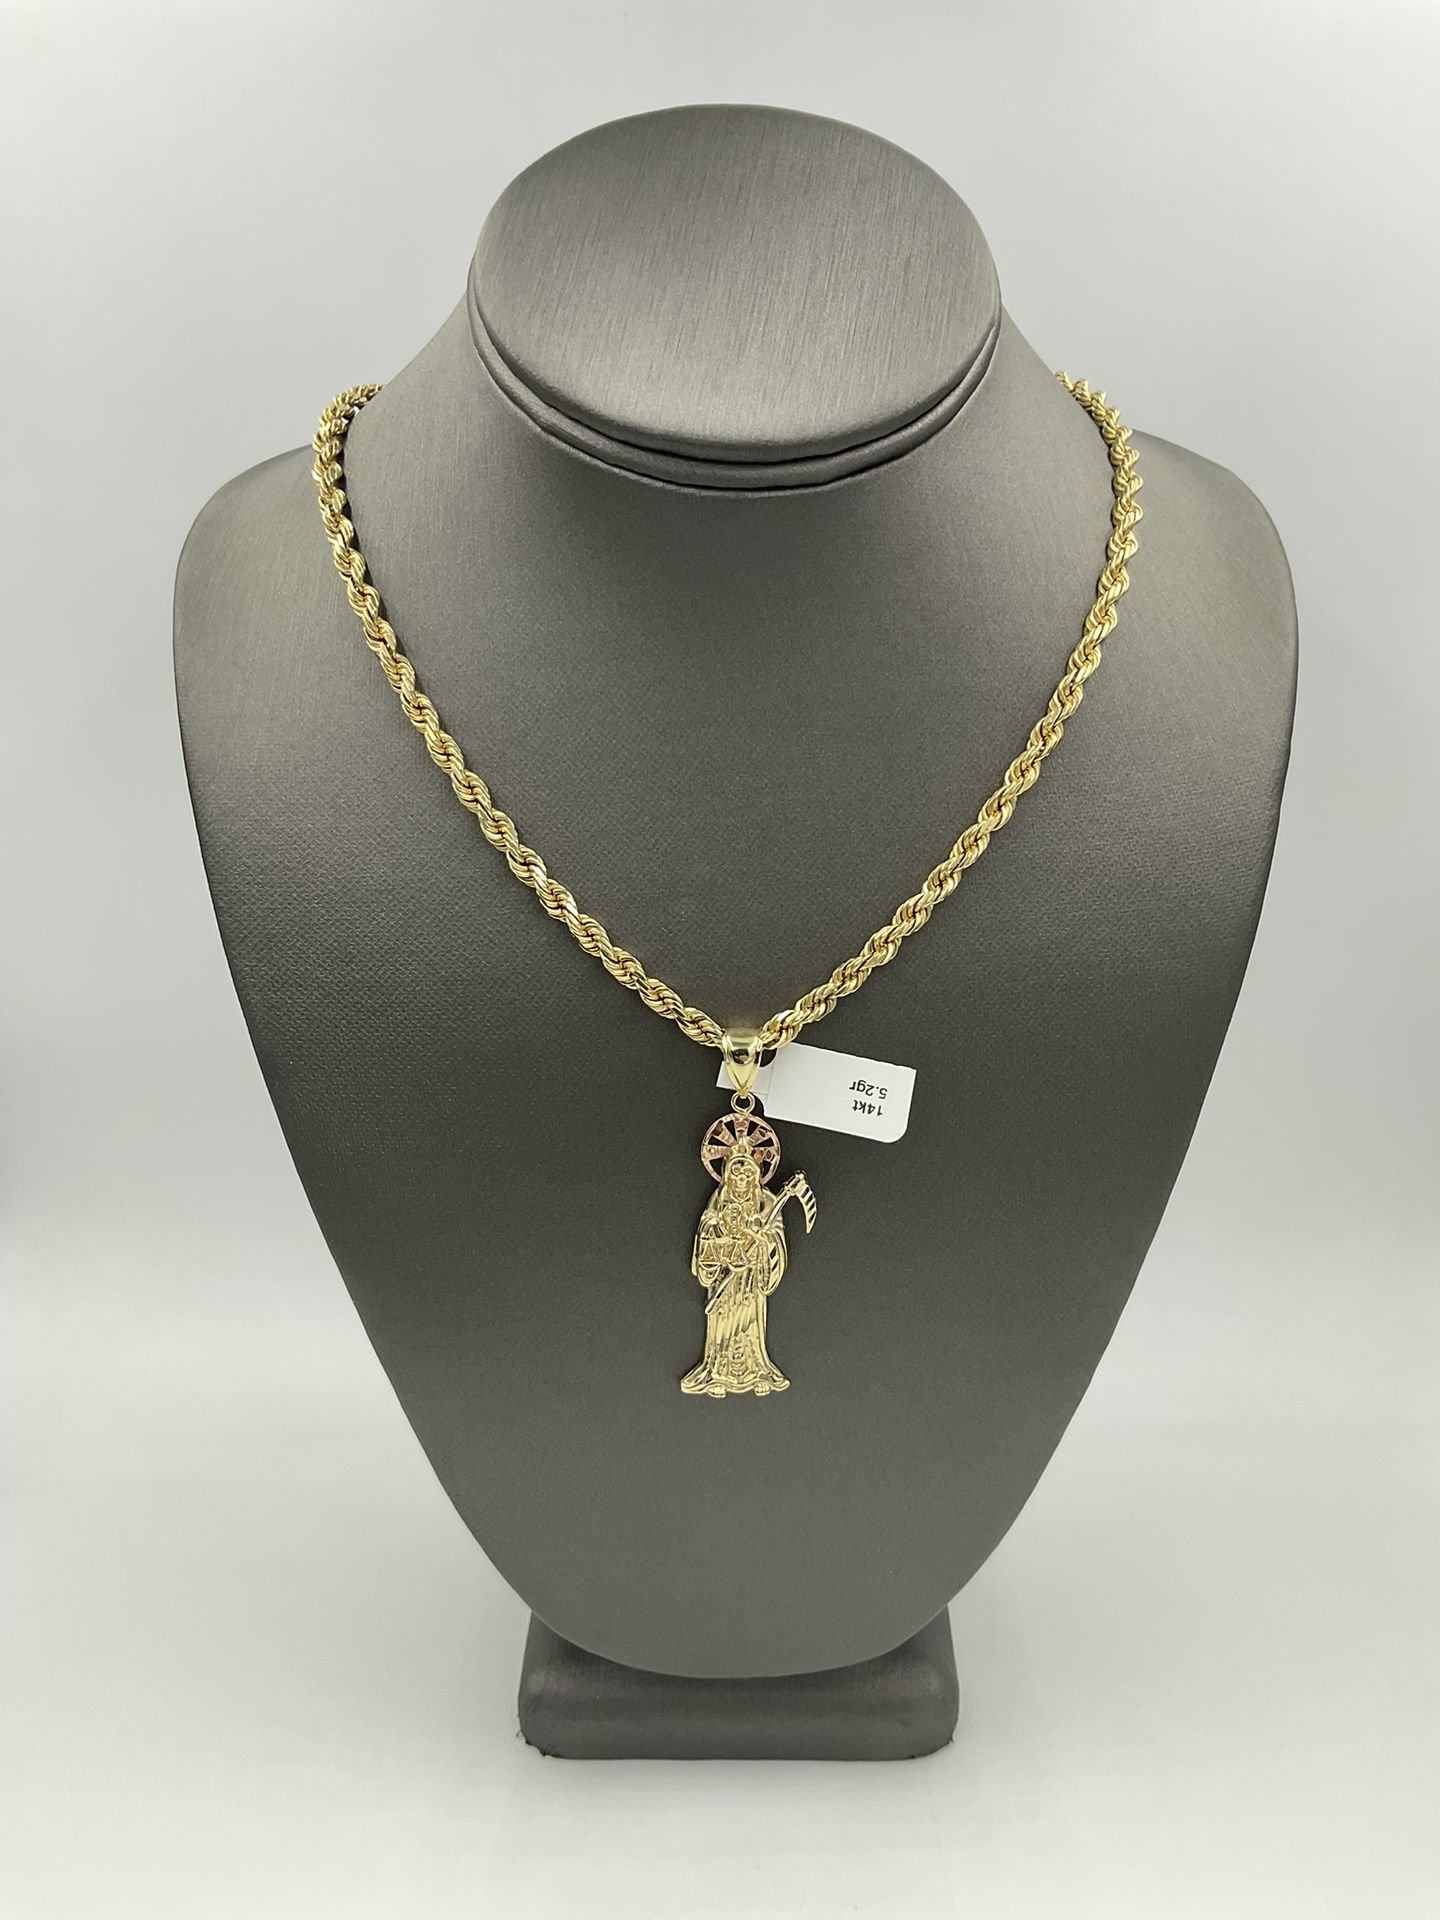 14KT YELLOW GOLD 24” ROPE CHAIN 44.4GR 4.00MM W/ 14KT YELLOW GOLD SANTA MUERTE CHARM 5.2GR